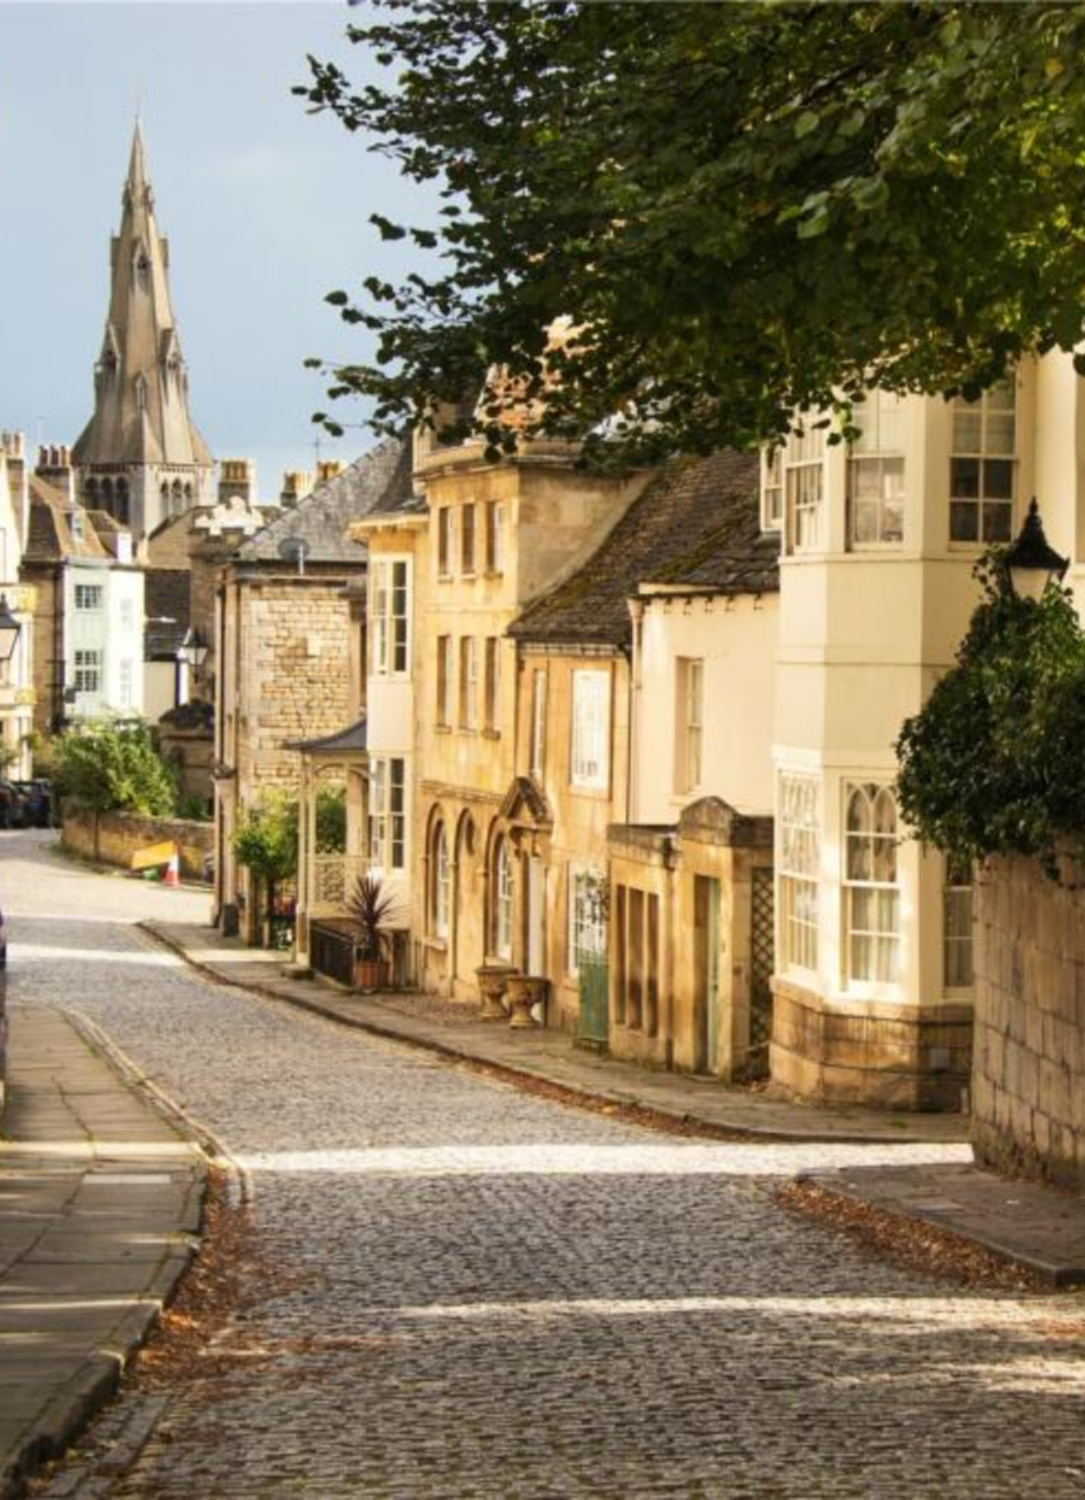 Medieval architecture in Stamford - a beautiful village with historic stone buildings in the UK.